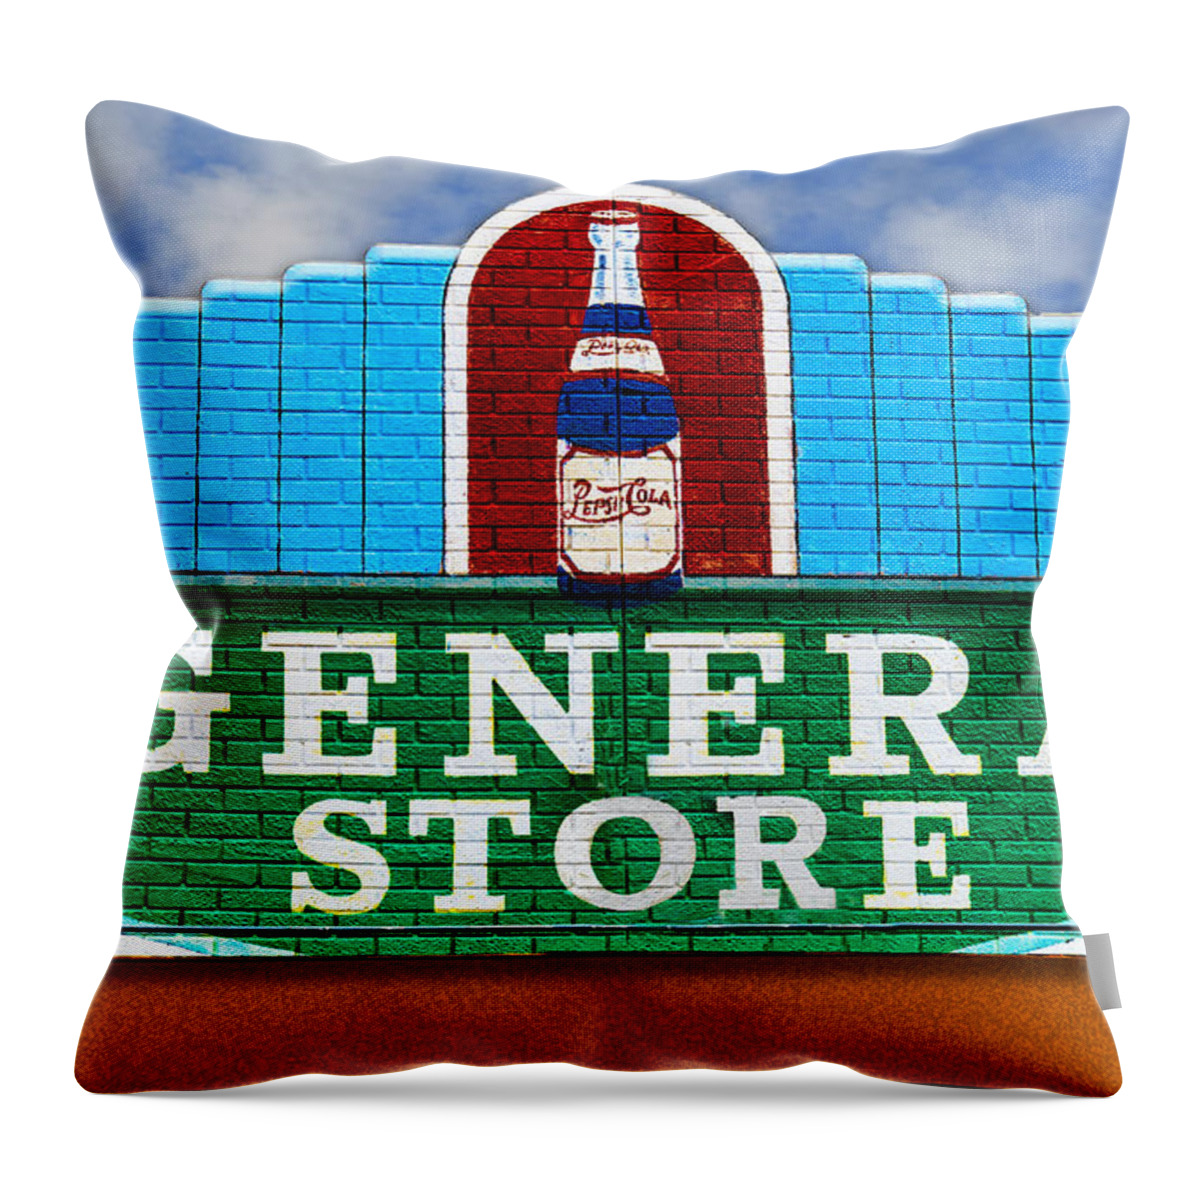 Photography Throw Pillow featuring the photograph The General Store by Paul Wear